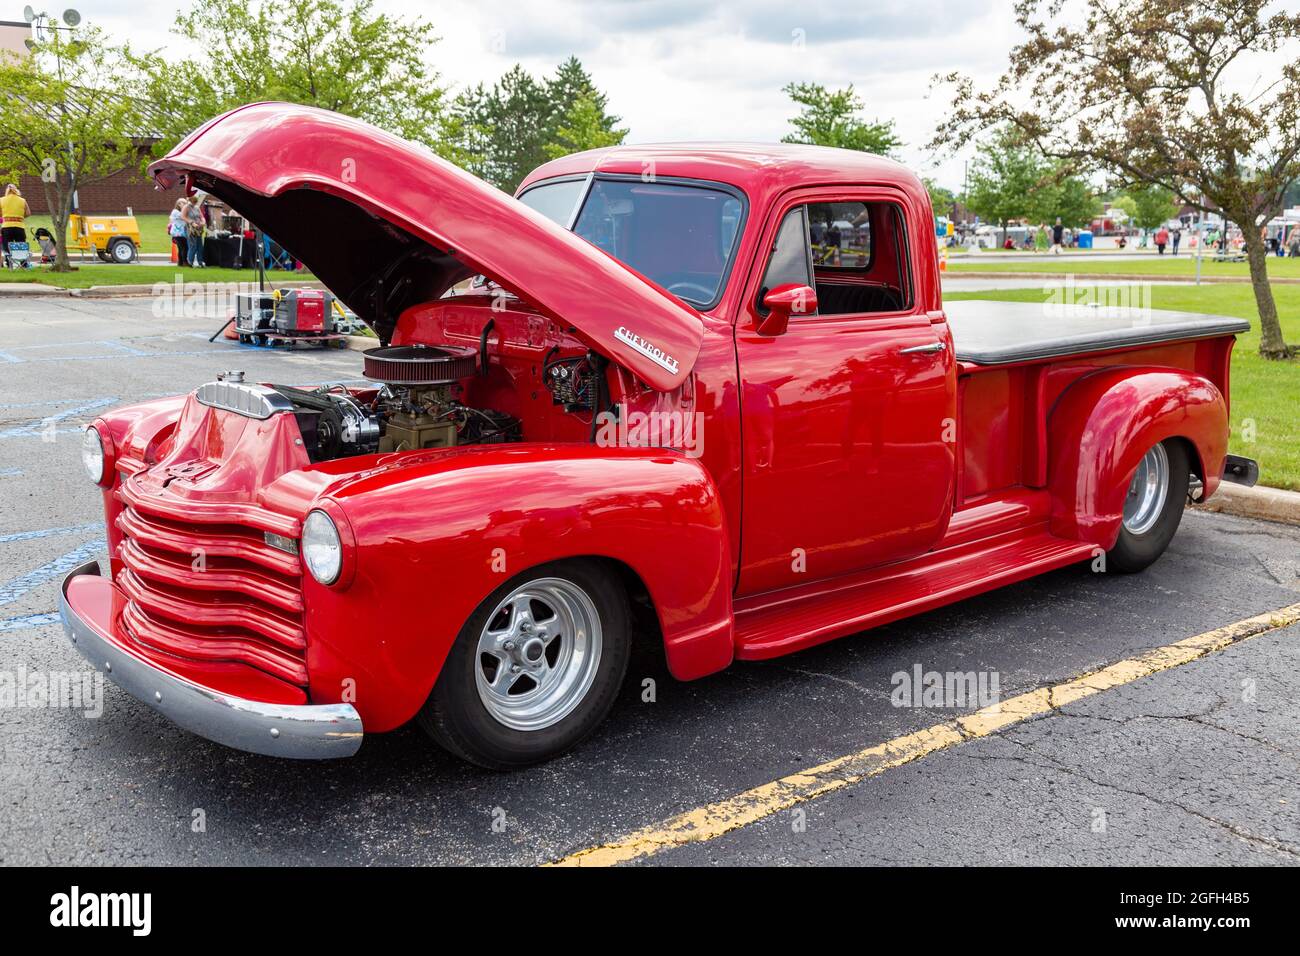 A classic red Chevrolet pick-up truck on display with the hood open at a car show in Angola, Indiana, USA. Stock Photo